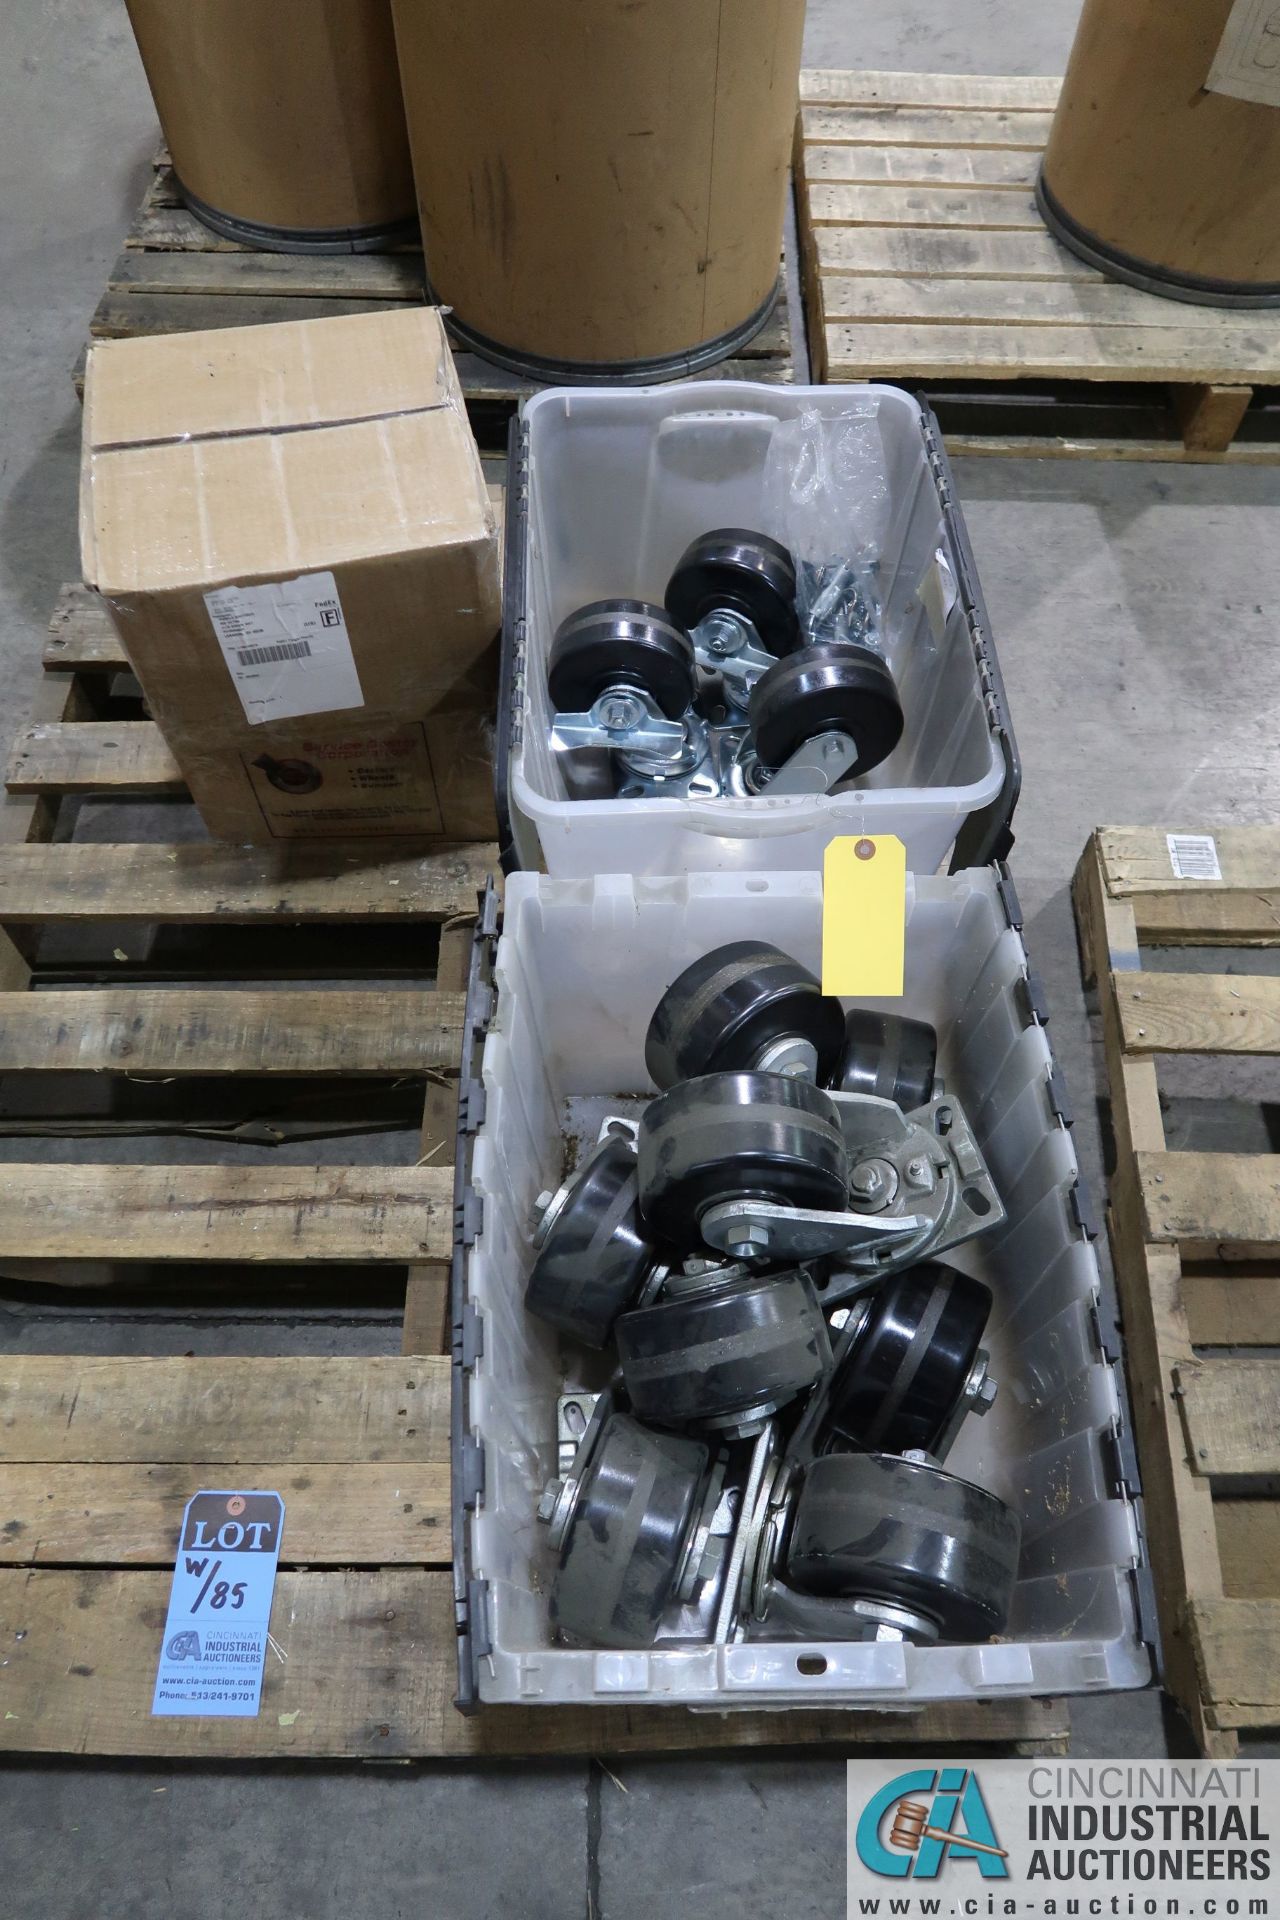 SKIDS CART WHEELS (NEW) **LOCATED AT 4119 BINION WAY, LEBANON, OH 45036** - Image 2 of 2